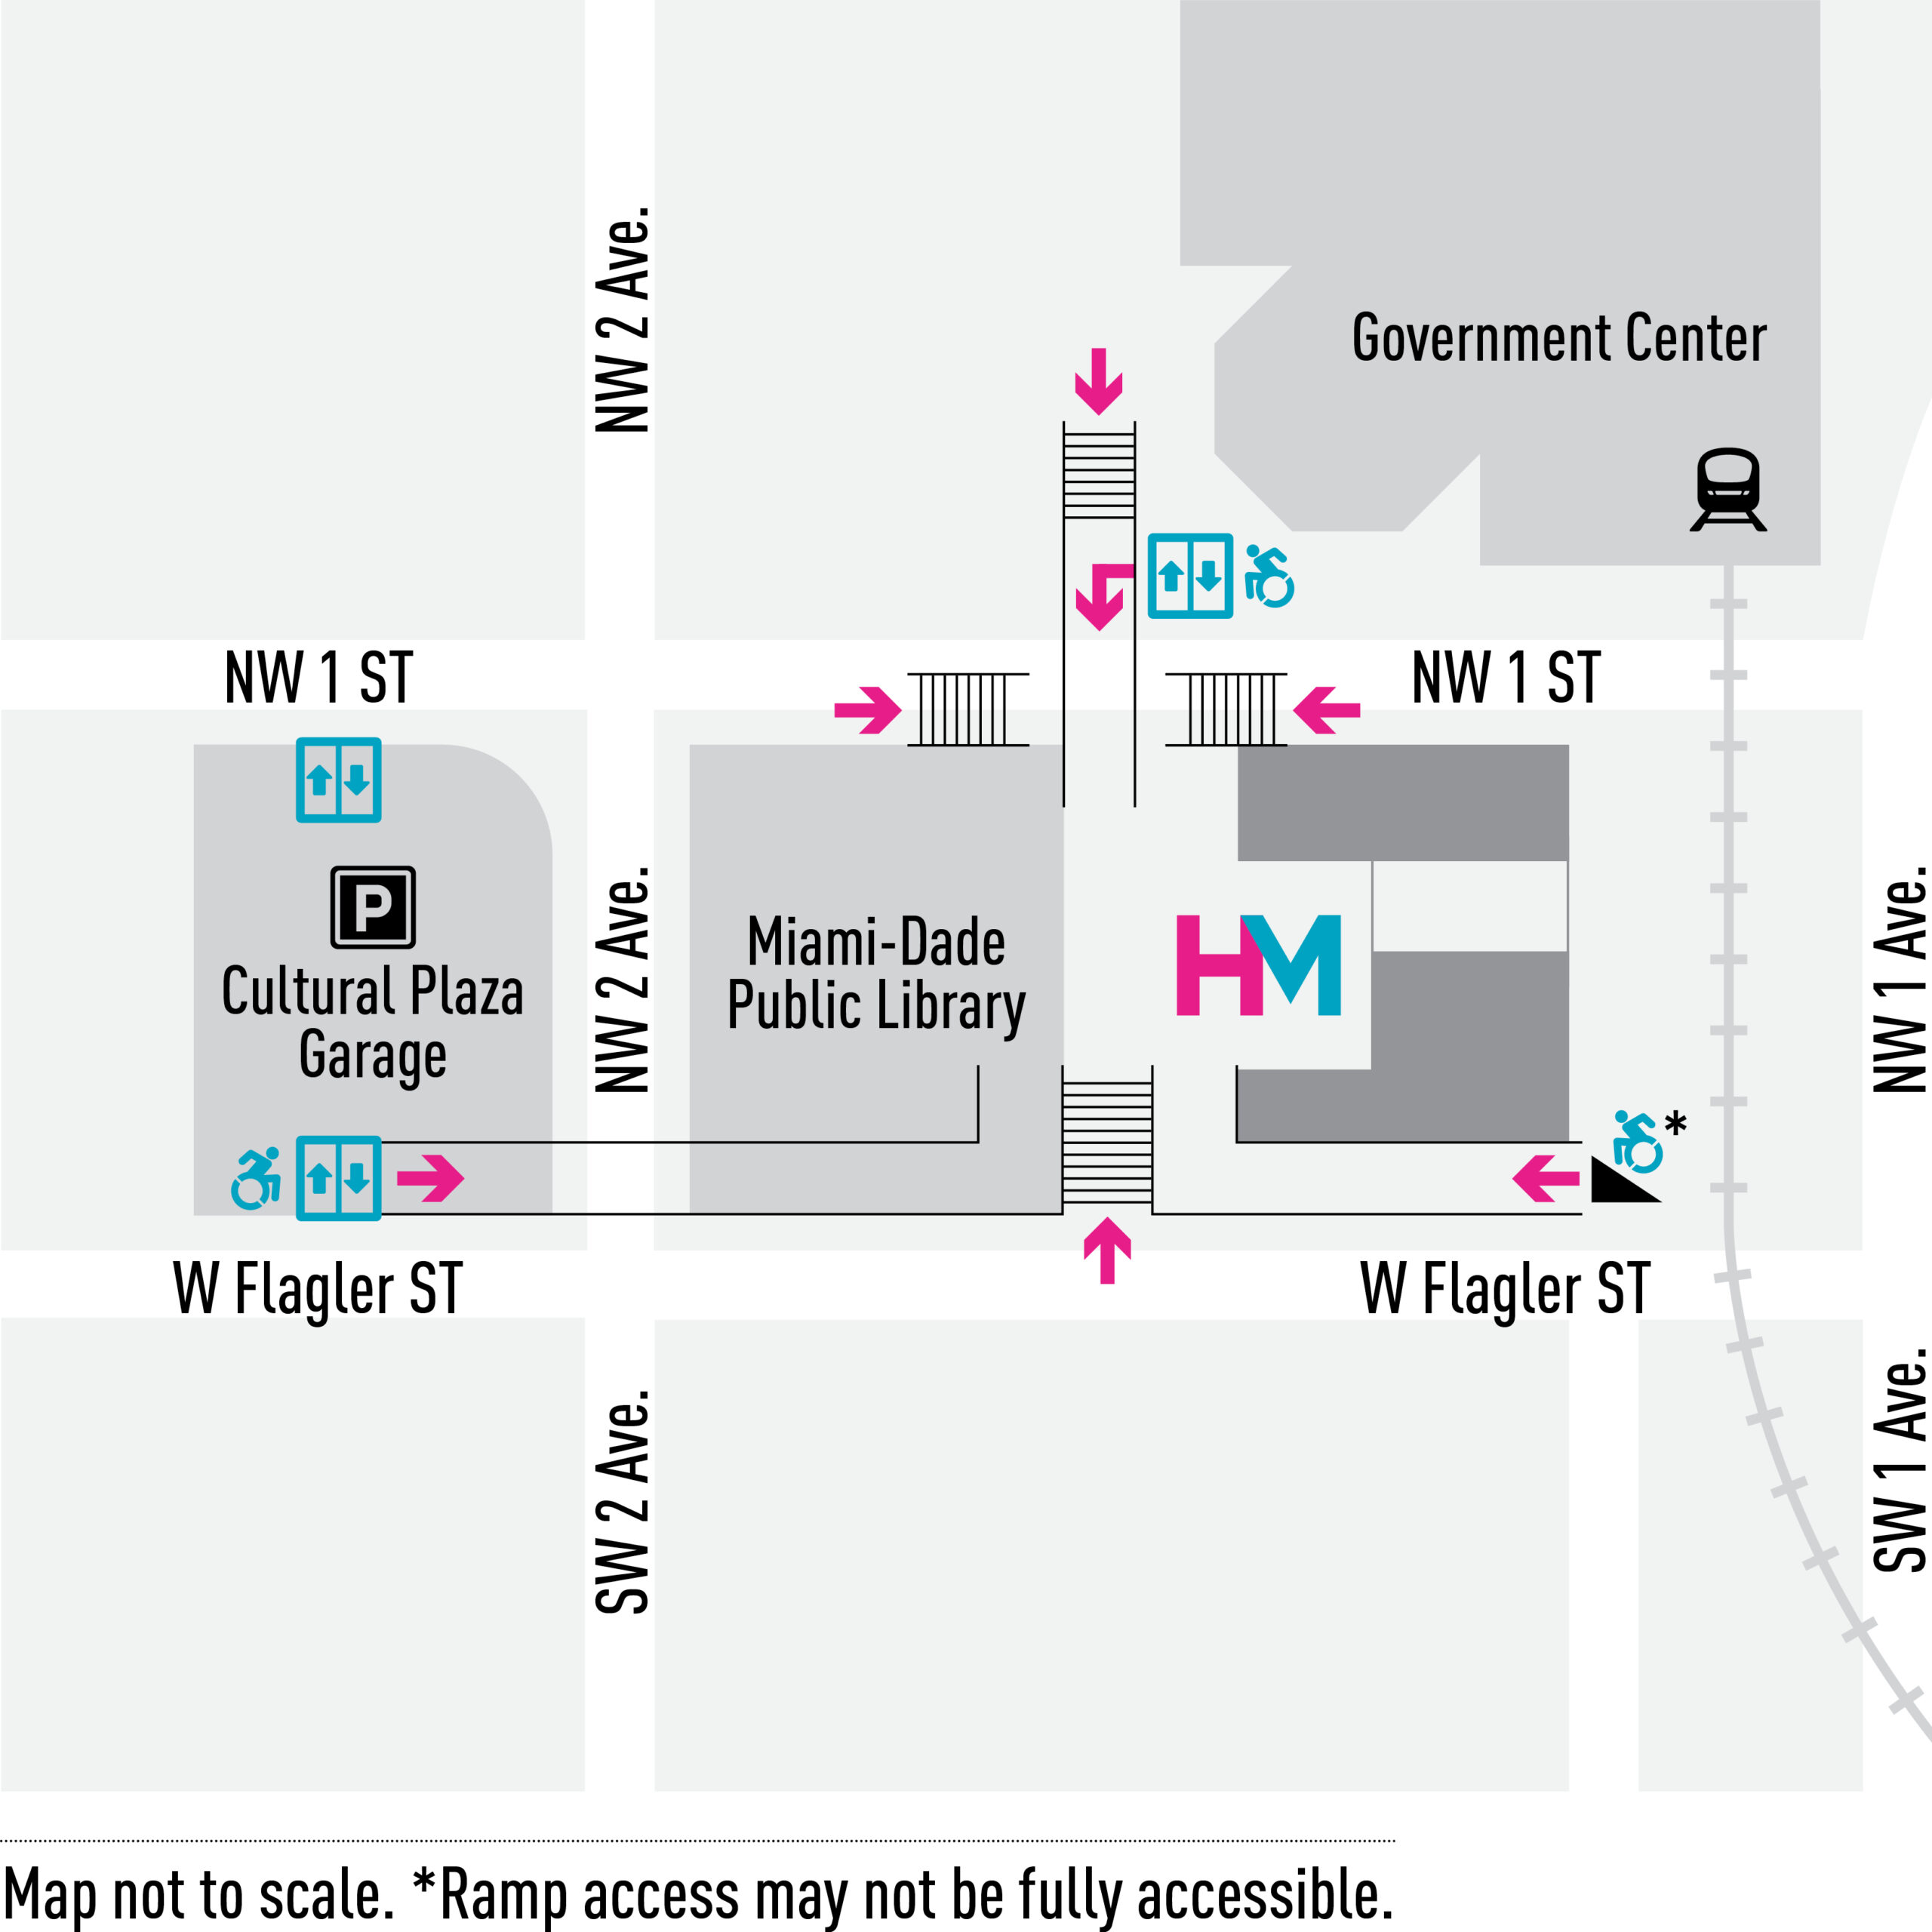 View of the museum and surrounding areas. Highlighted locations include HistoryMiami Museum, Government Center, Miami-Dade Public Library, and the Cultural Plaza Garage.